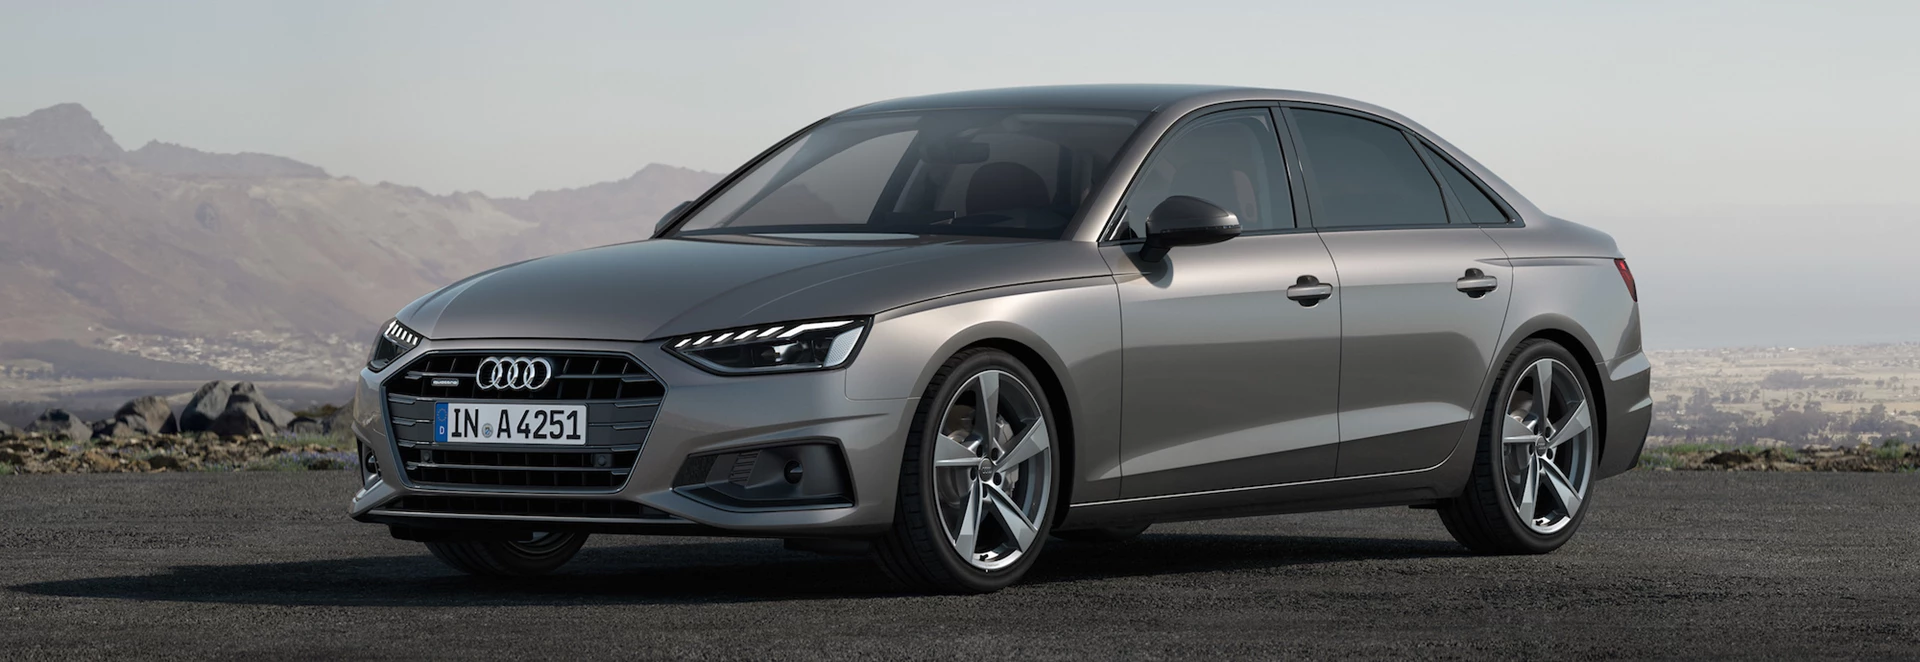 Audi unveils revised A4 with new look and engines 